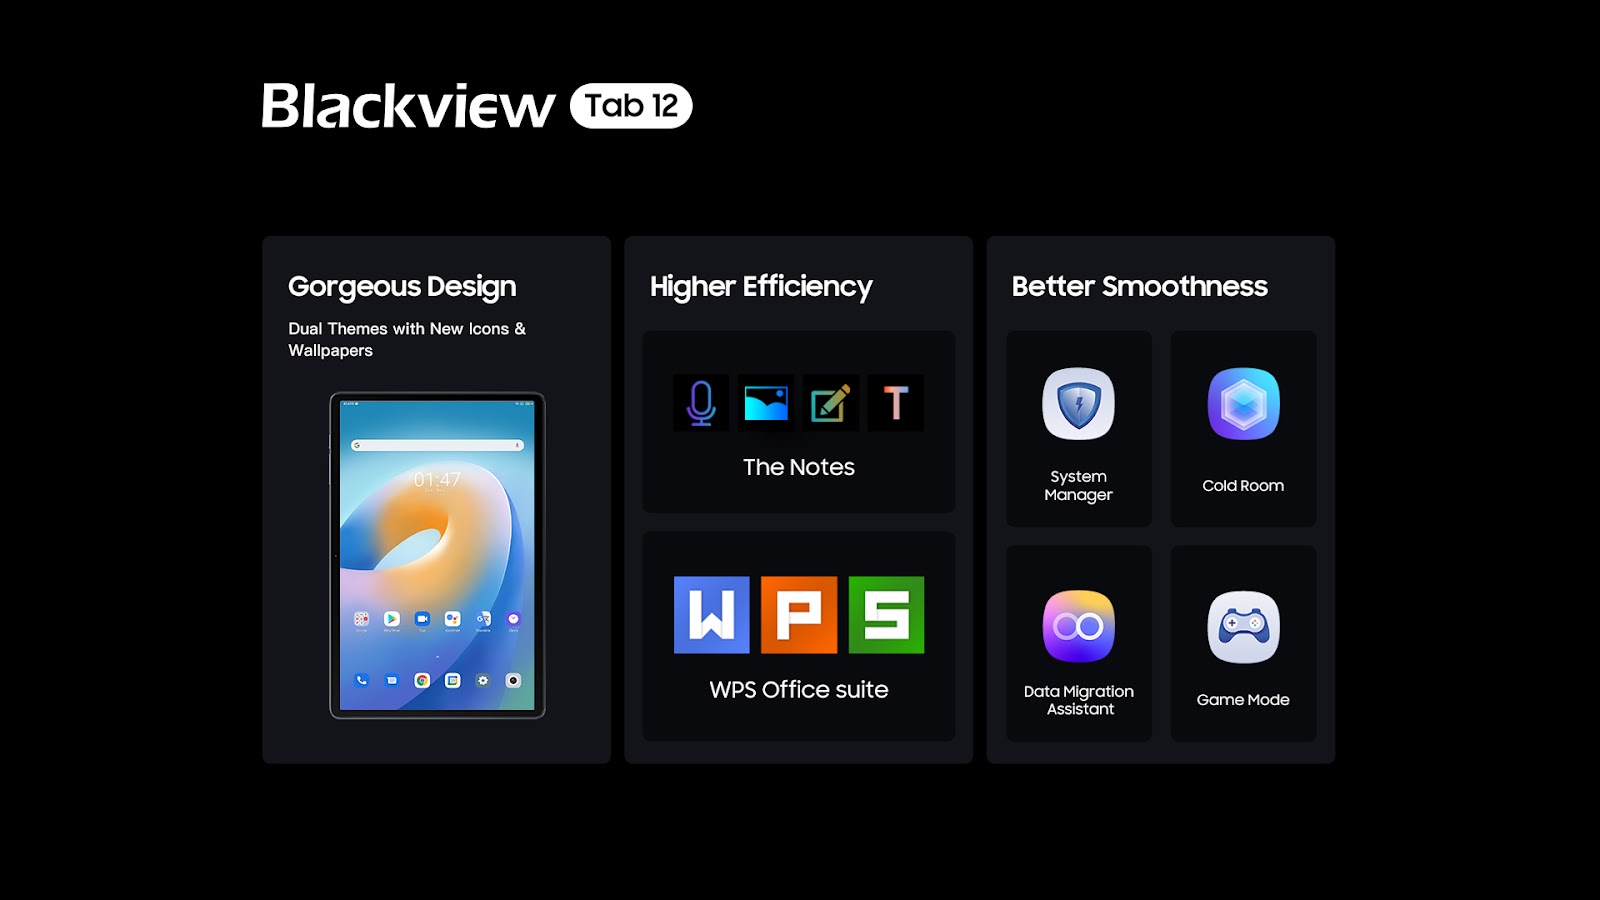 Blackview Tab 12 Now Goes on Sale: the New Advanced Tablet with Voguish Design and Doke OS_P 2.0